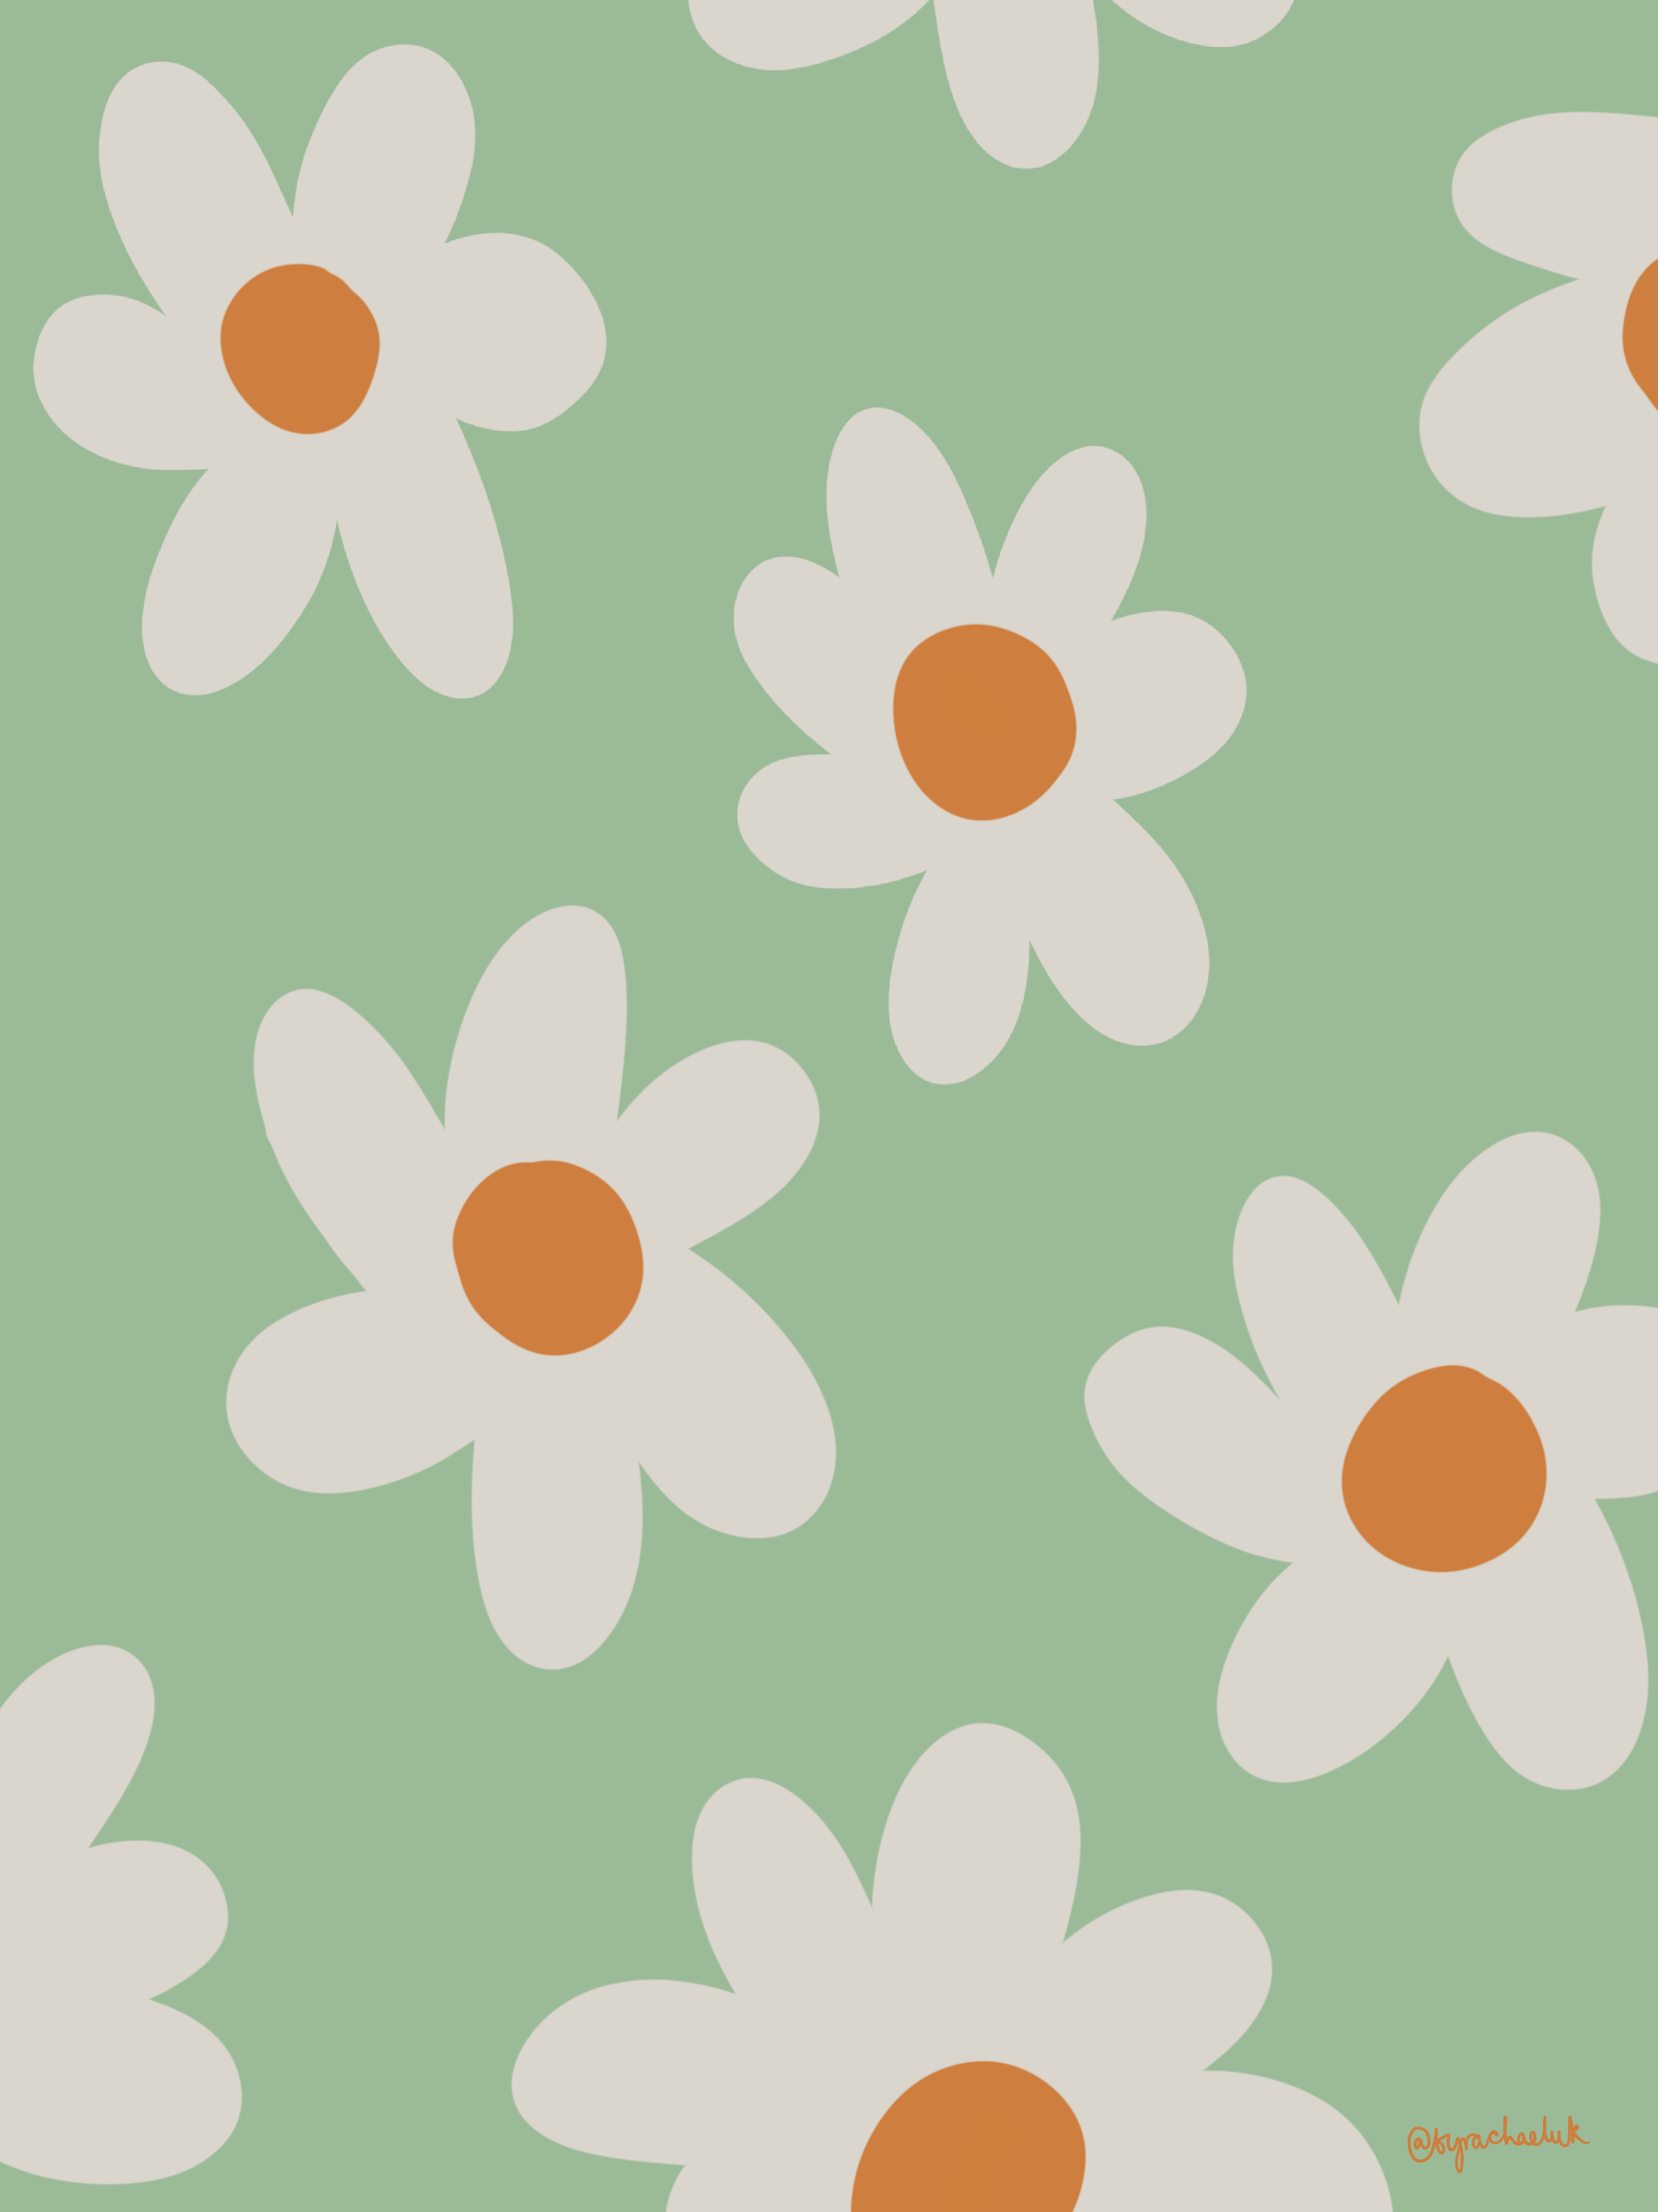 Floral Sage Green Phone Wallpaper. HQ. Cute. Aesthetic. Background. iPhone. iPhone background, Daisy wallpaper, Wallpaper